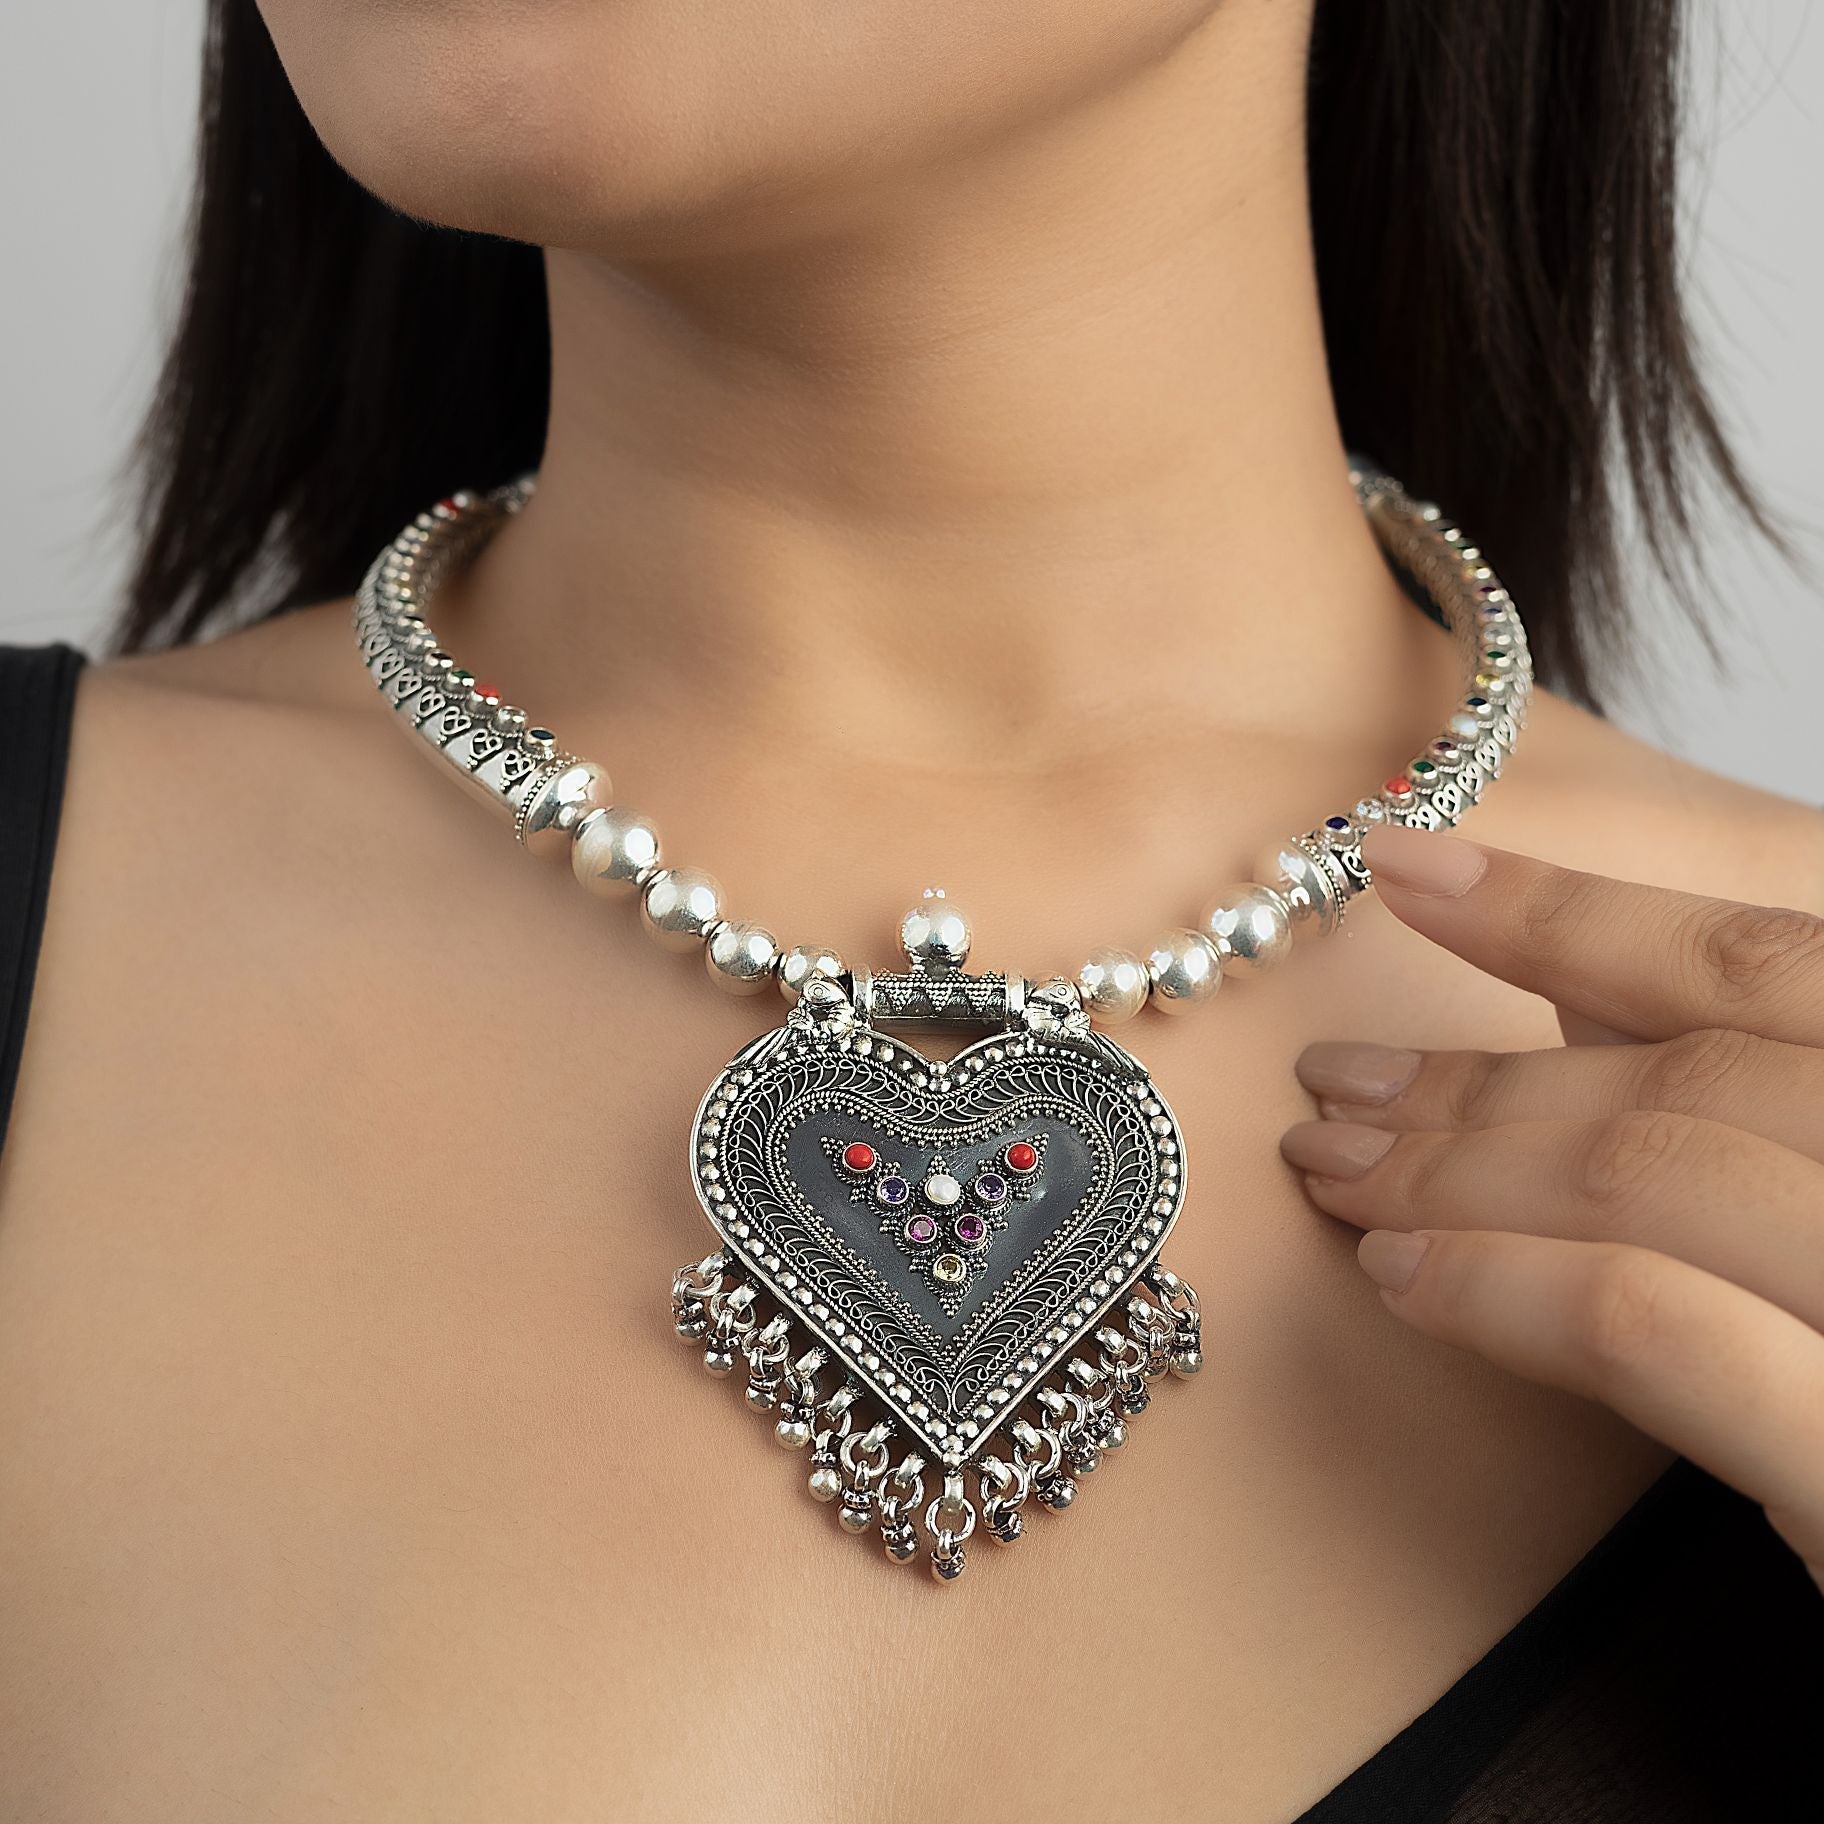 Exquisite Hasli Patterned with Heart Shaped Pendant Necklace silverhousebyrj